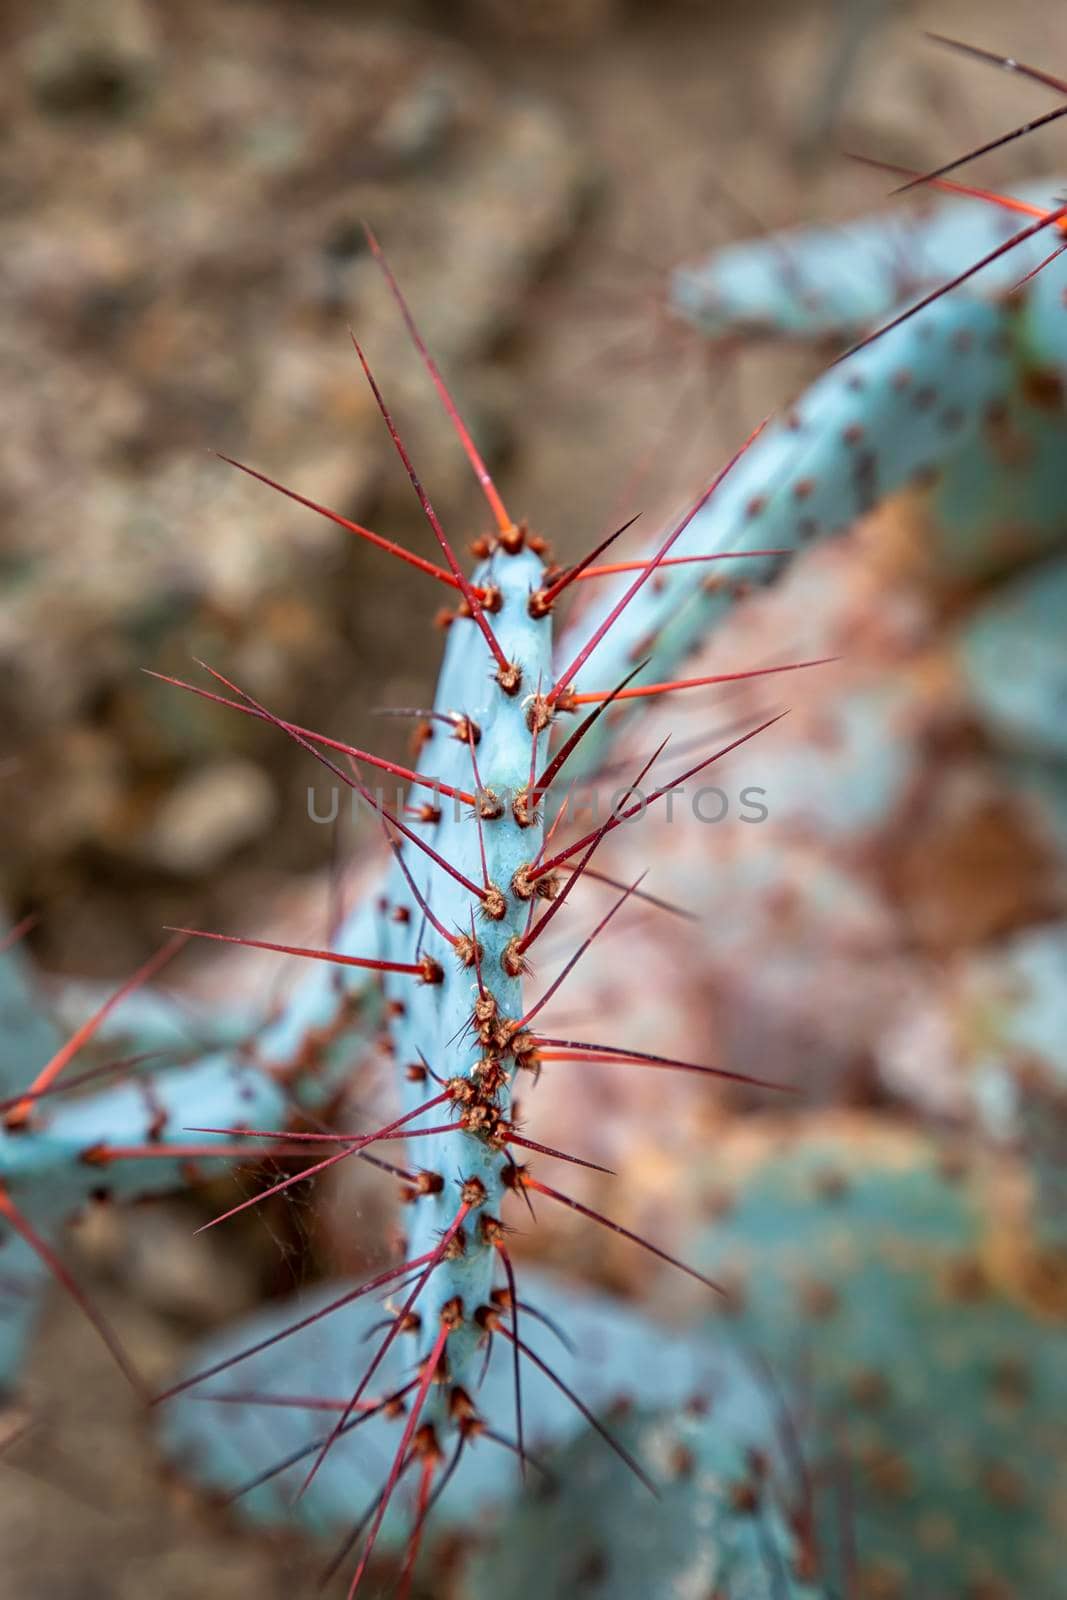 Long flower thorns of a cactus. close view. by EdVal